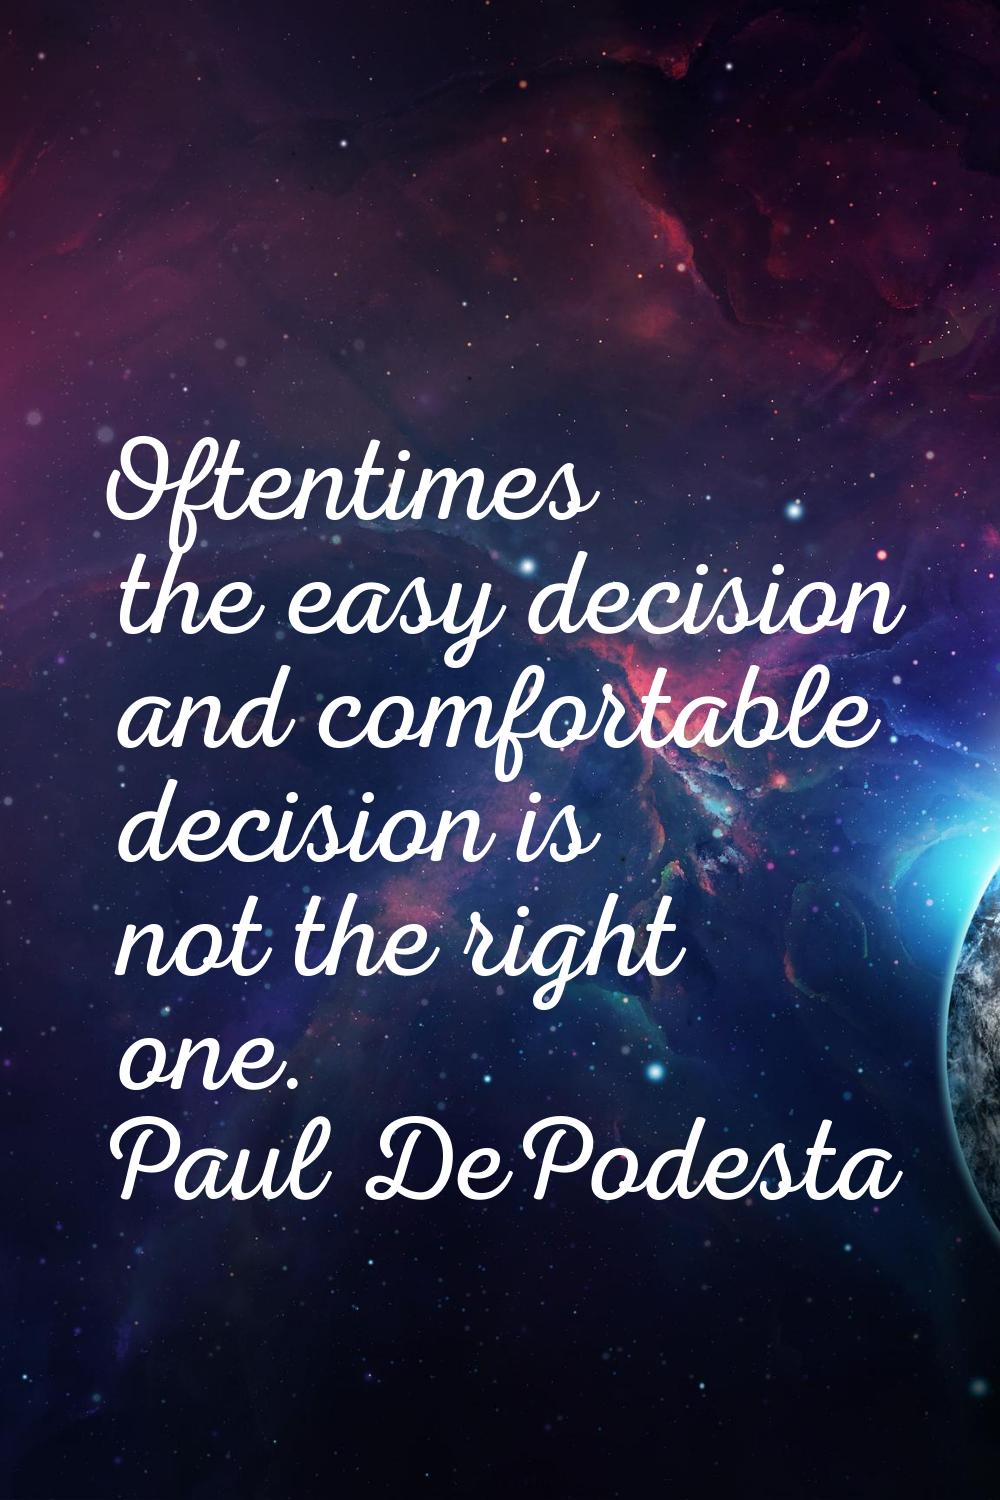 Oftentimes the easy decision and comfortable decision is not the right one.